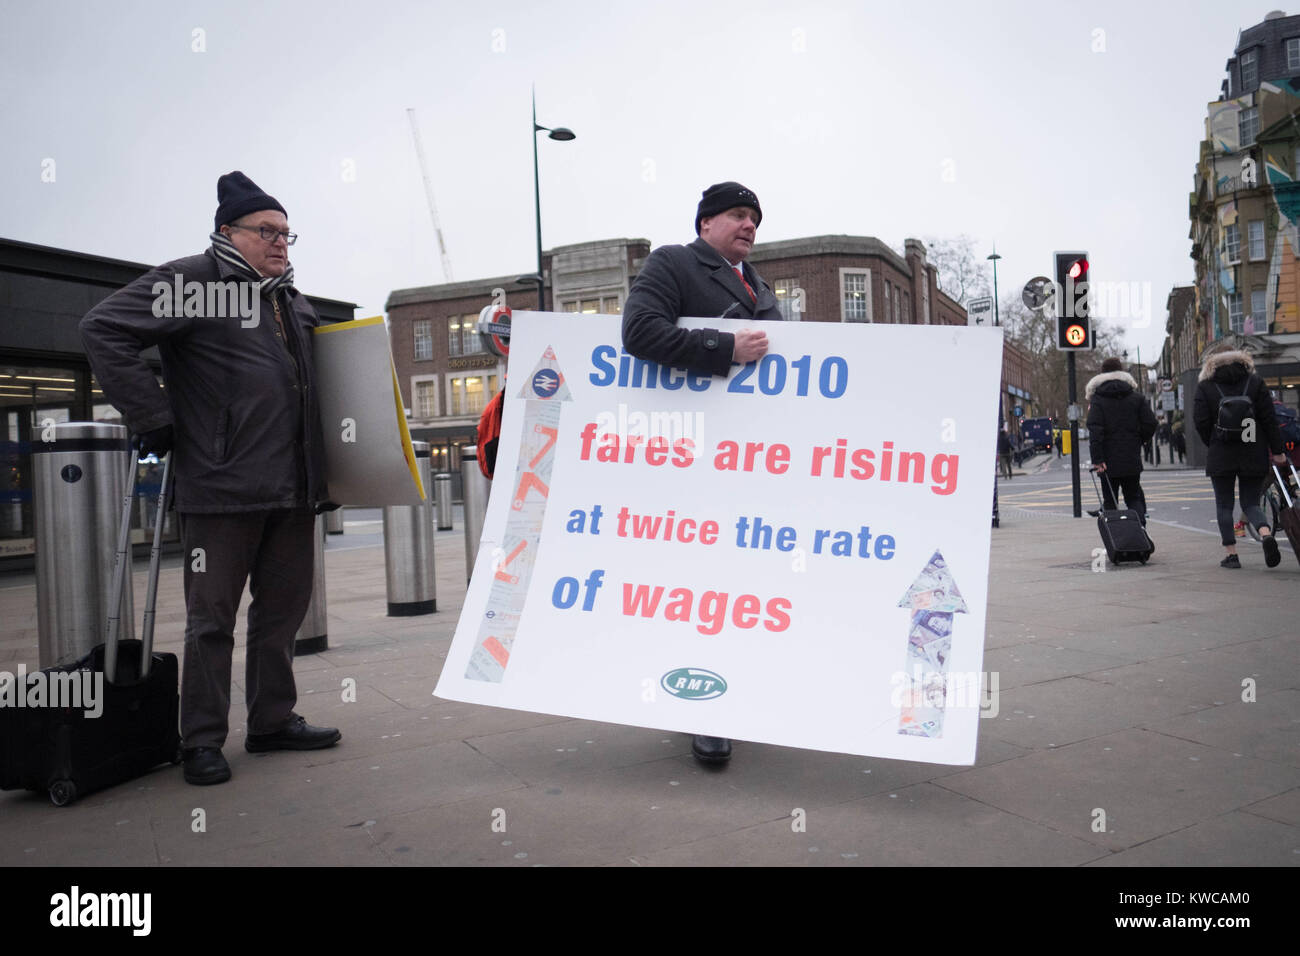 Campaigners protest against rail fare increases outside King's Cross station in London. Stock Photo